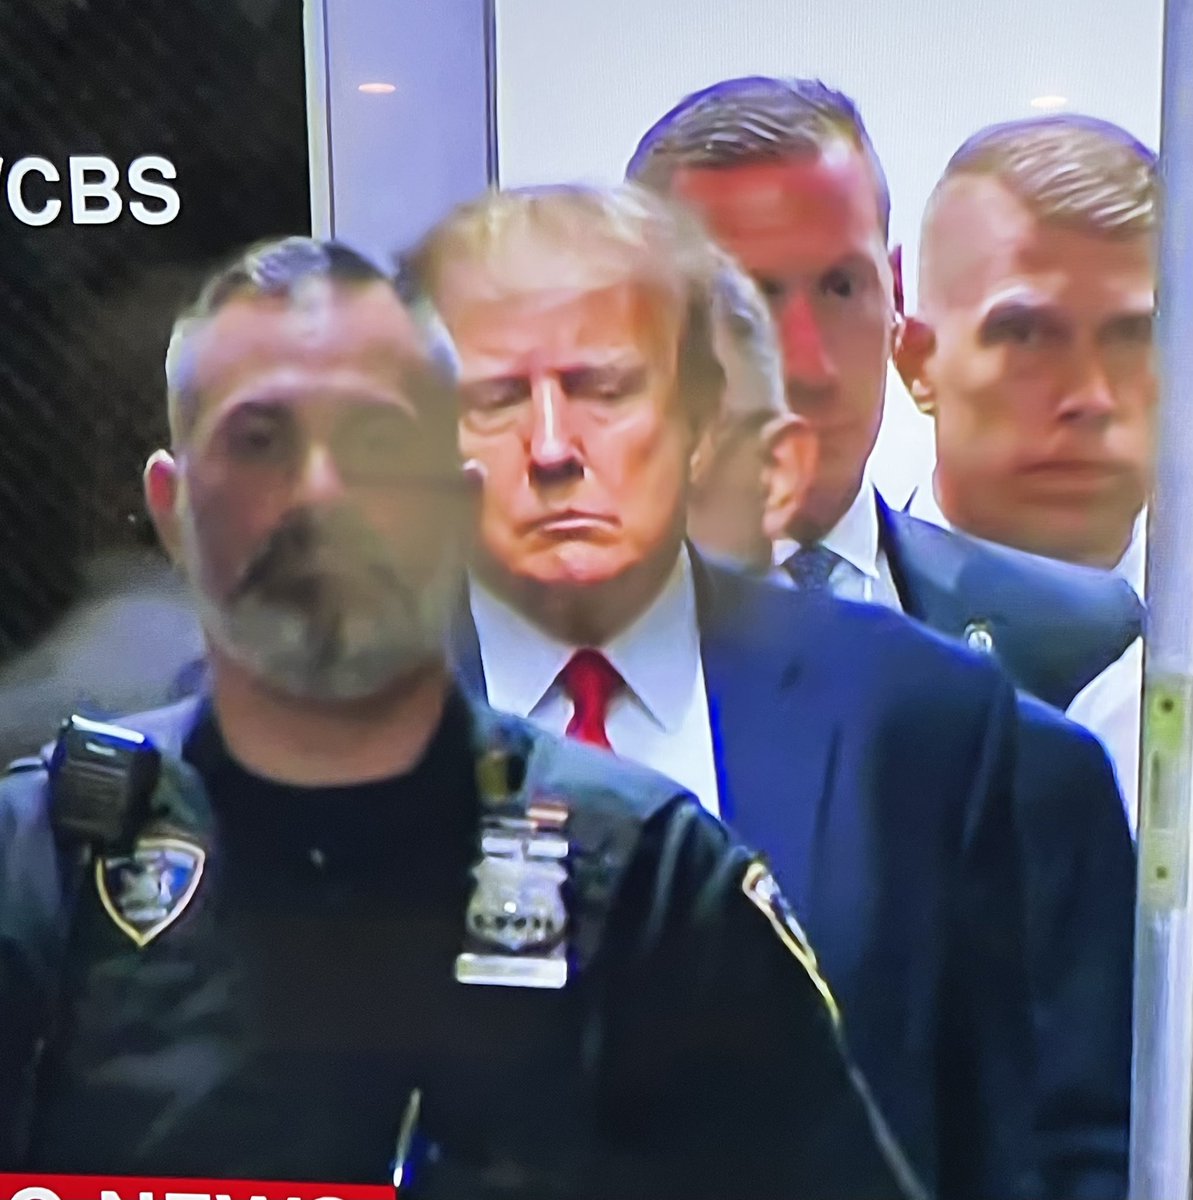 🚨MAJOR BREAKING: First photos have emerged showing Donald Trump entering the courtroom. Images show Trump sullen, quietly walking slowly accompanied by Secret Service and NY police officers. This is the first “perp walk” captured of a former United States president. He…